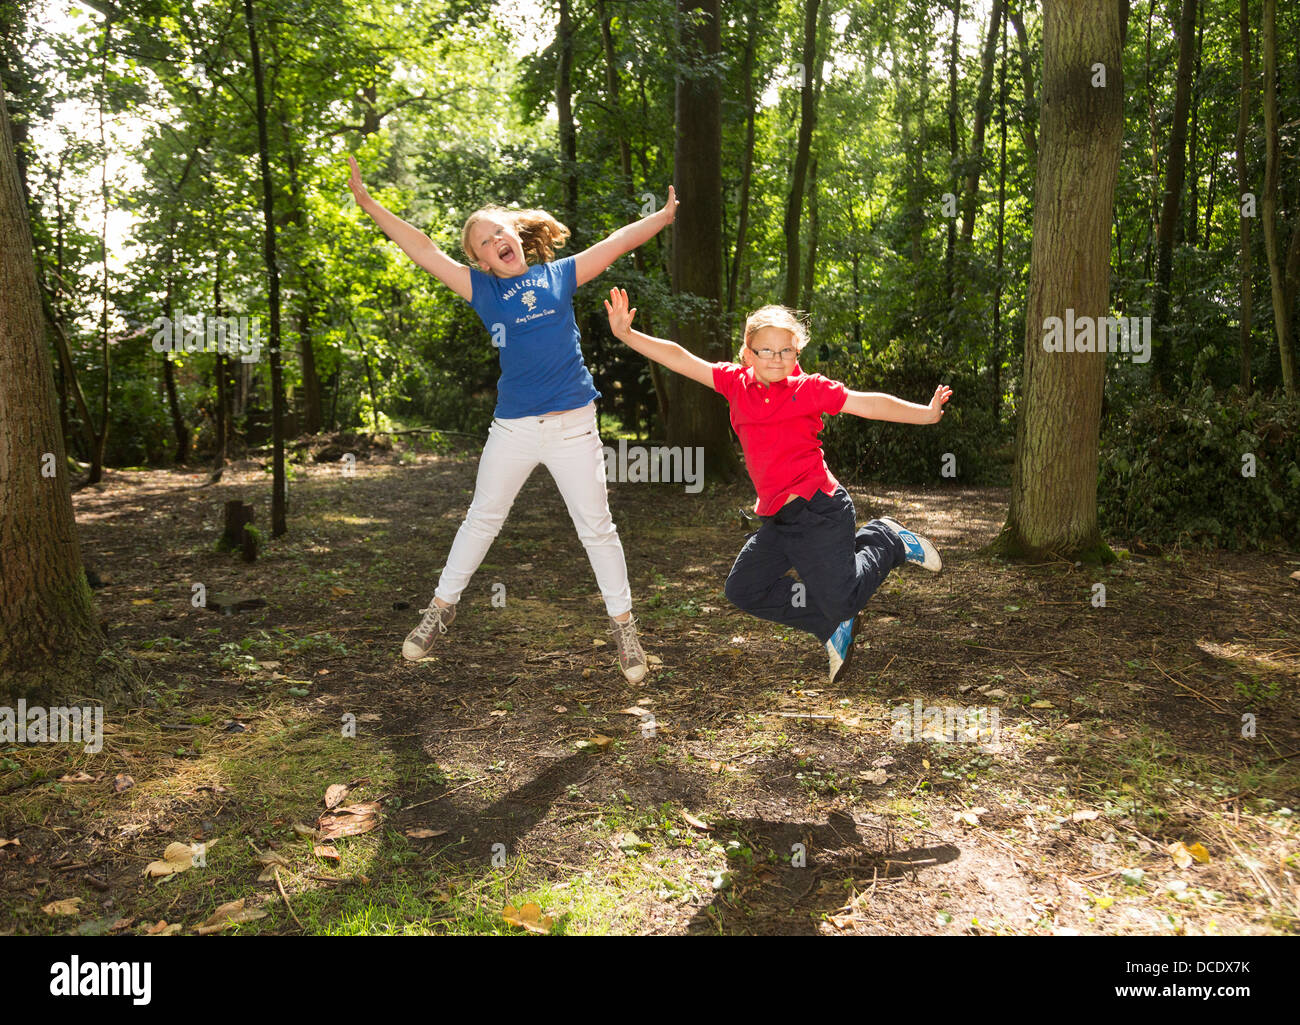 two girls playing outdoors Stock Photo